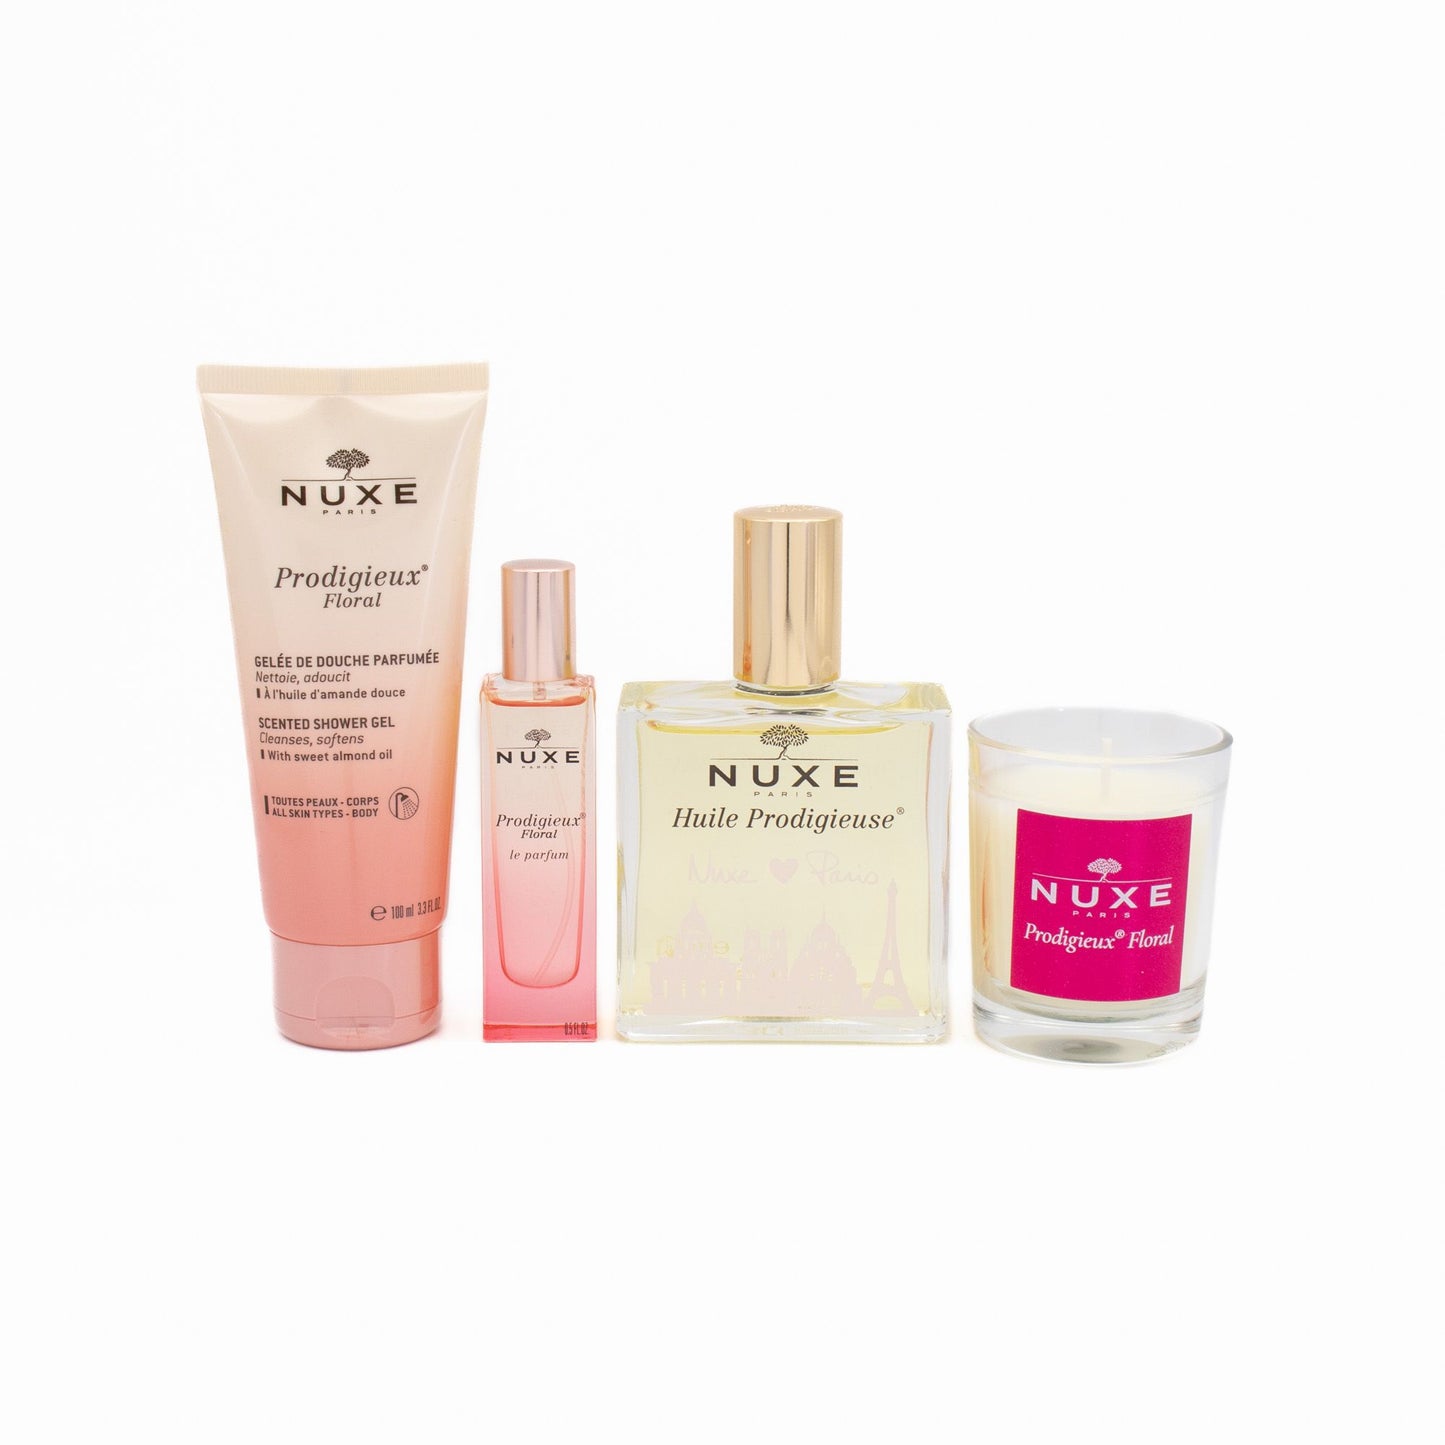 NUXE The Prodigieux Floral Happy in Pink 4 Piece Gift Set - Imperfect Box